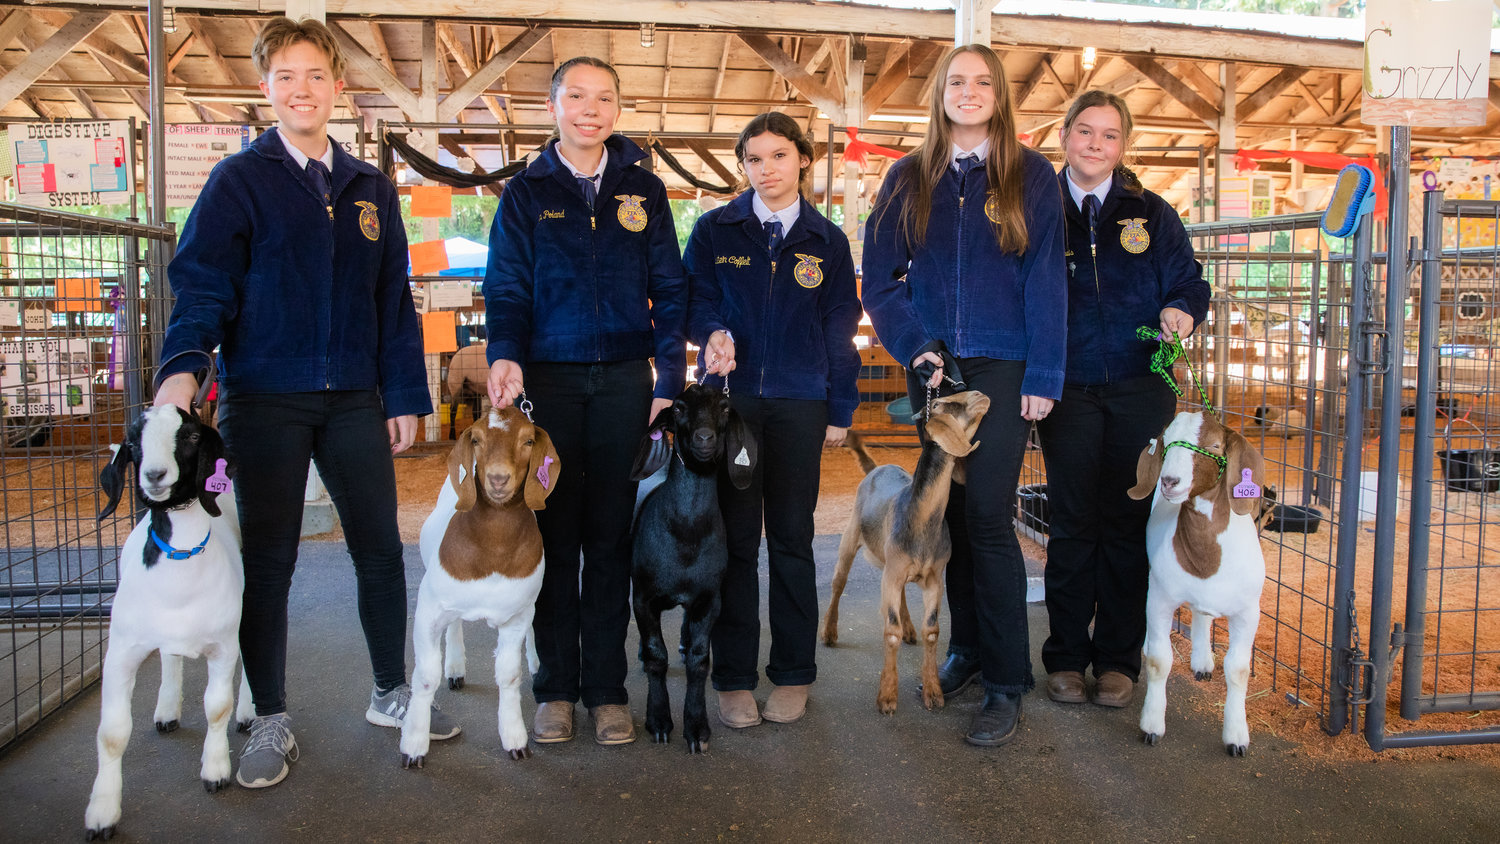 From left, Yelm FFA Members Fiona Fisher, Kyla Poland, Maile Poland, Aurora Cooper, Kai Ann Lewis and Anna Mills pose for a photo with goats Angus, Soos, Waddles, Grizzly and Rico at the Thurston County Fair on Thursday, July 28.